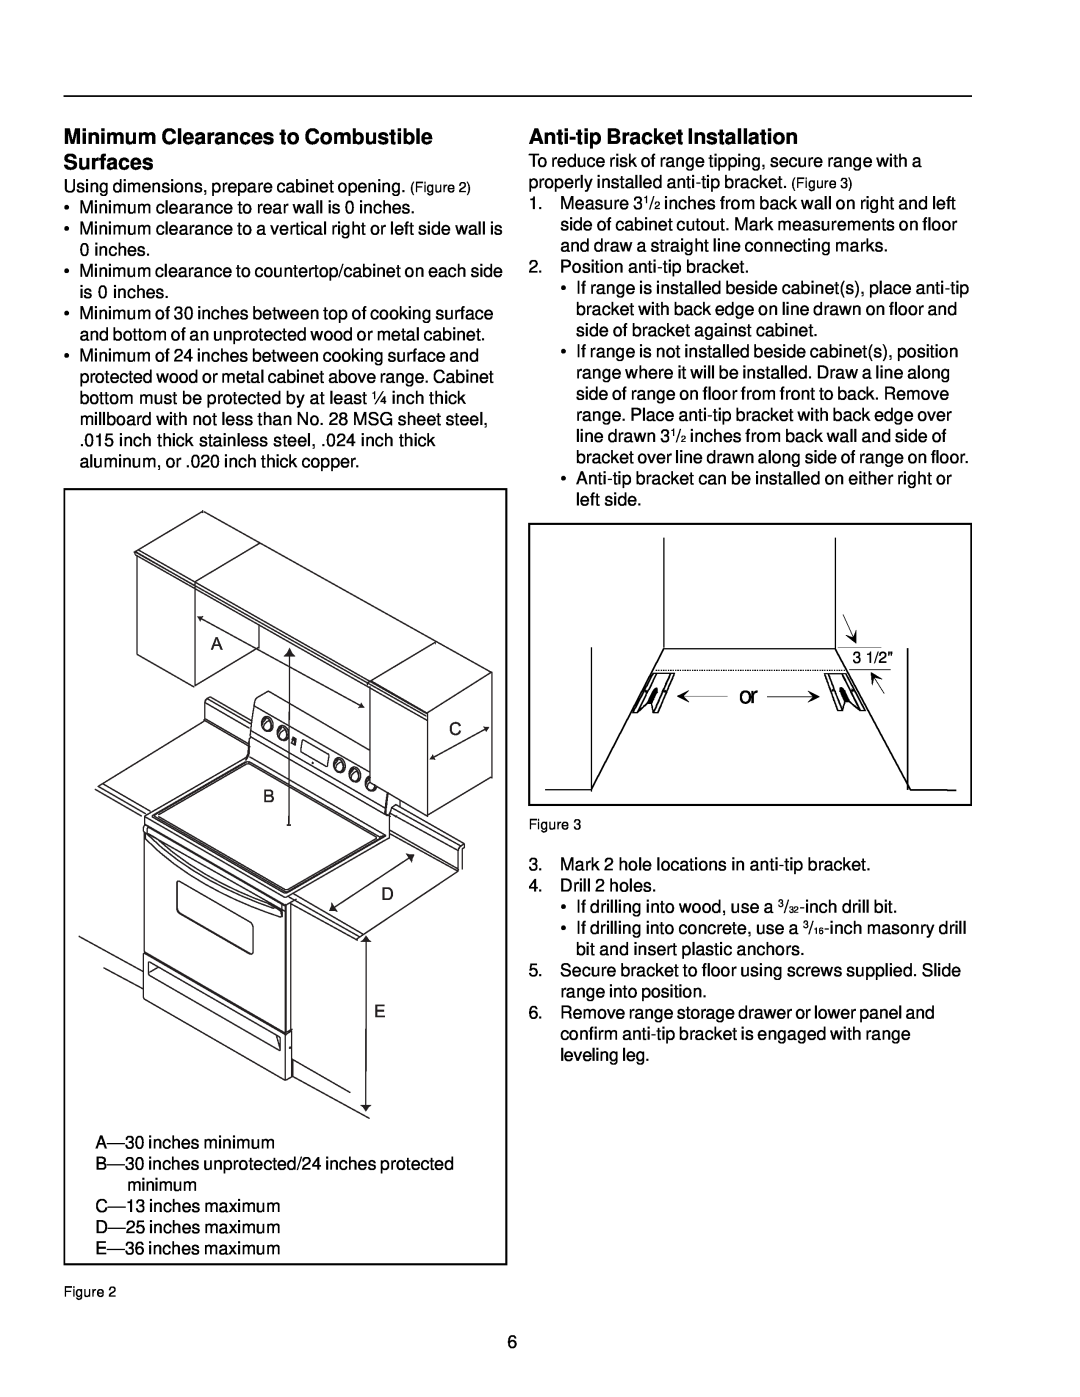 Amana ARR6400/ART6511 owner manual Minimum Clearances to Combustible Surfaces, Anti-tip Bracket Installation 